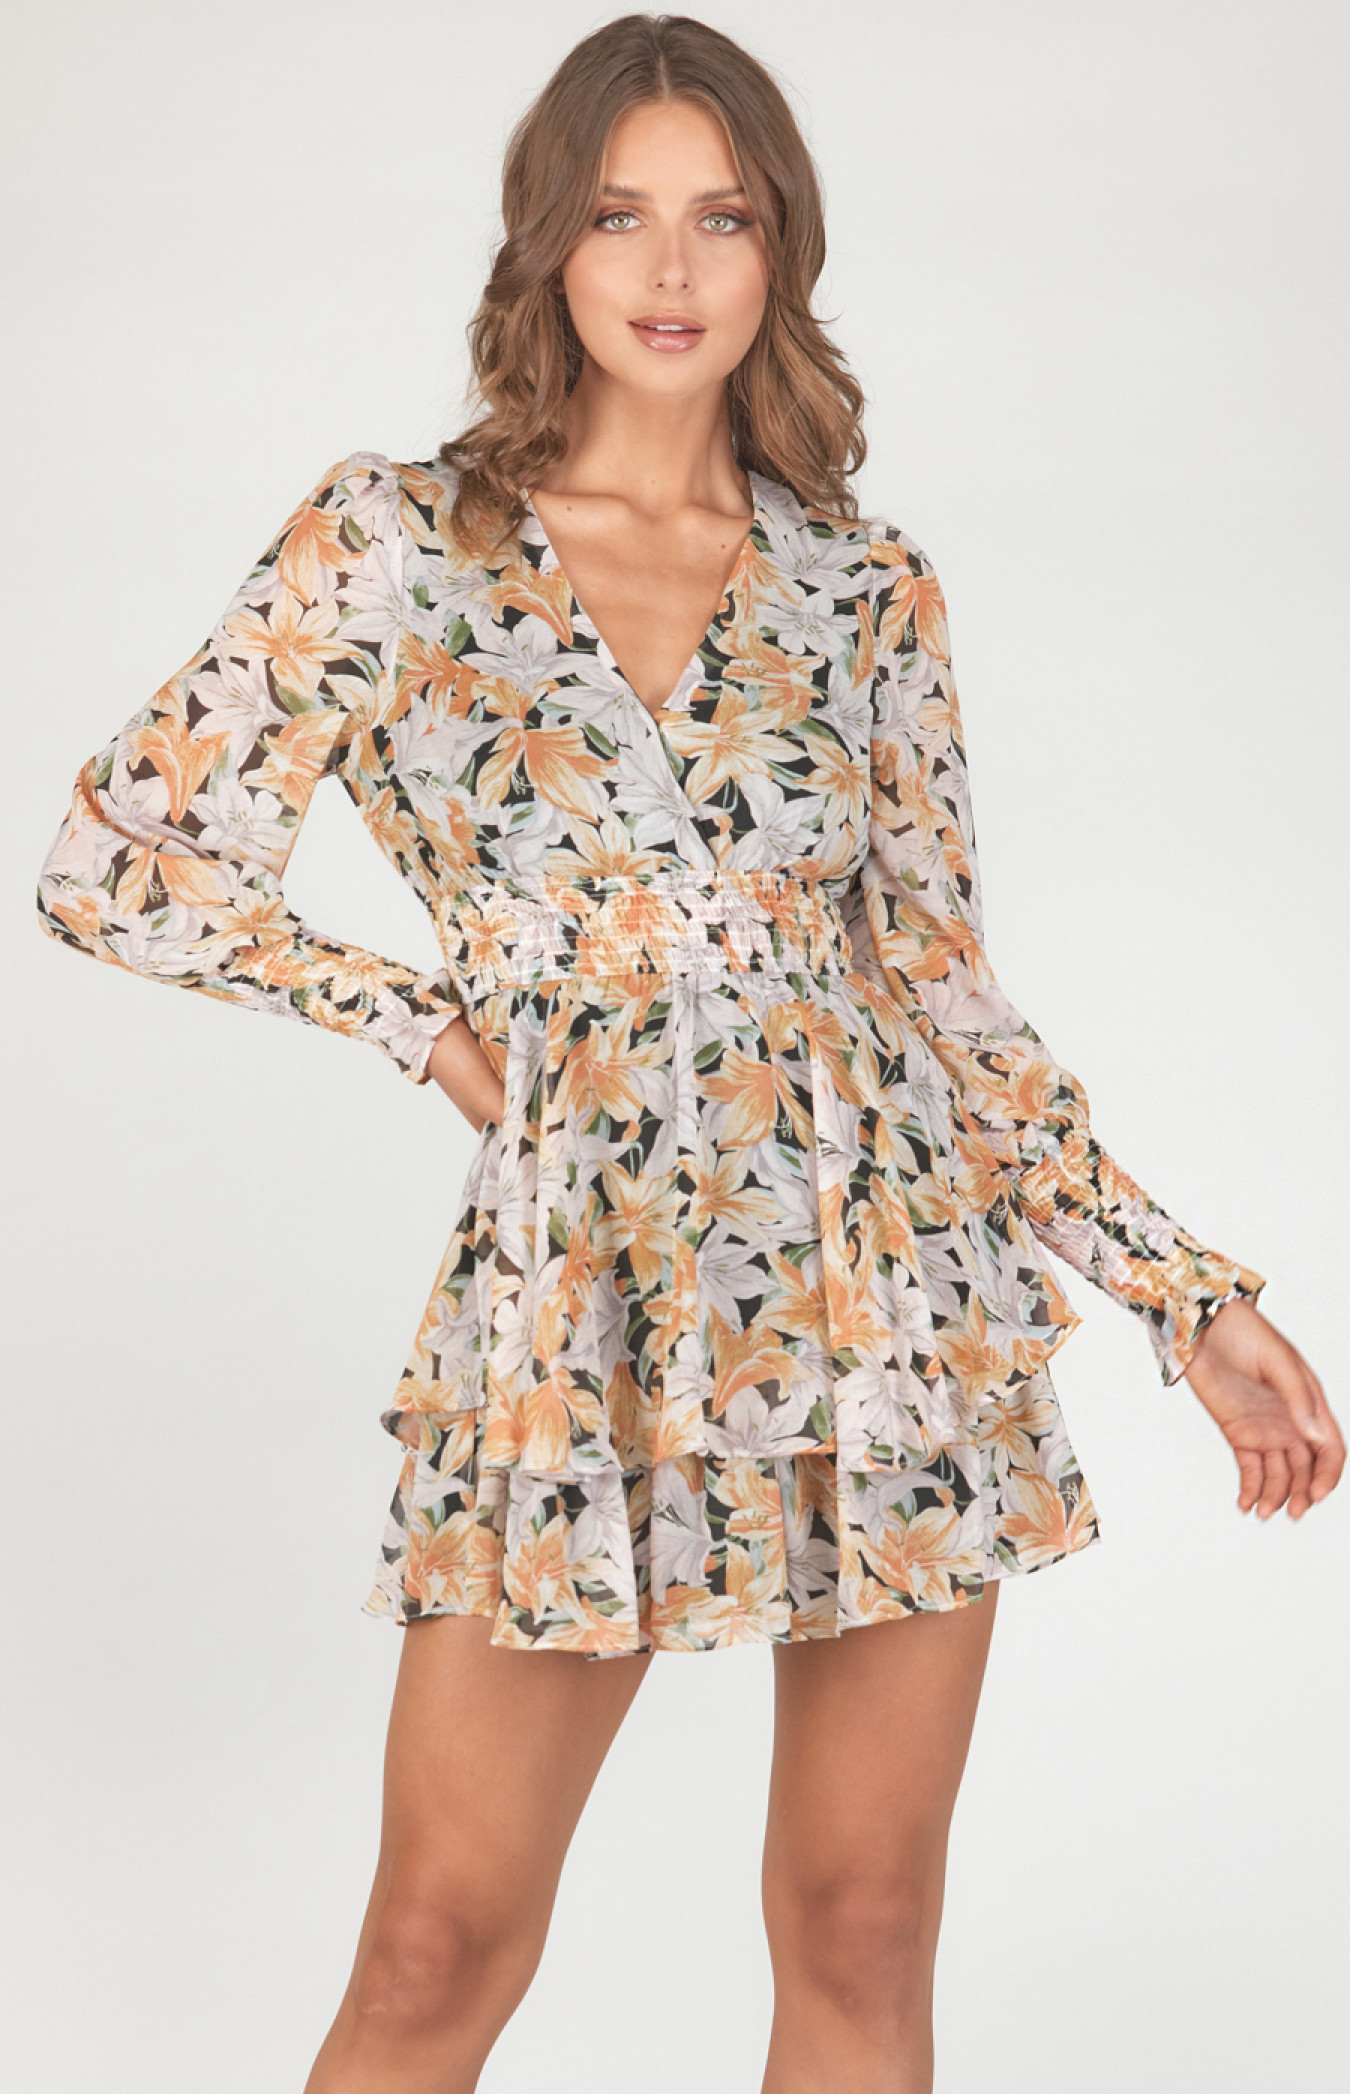 Floral Chiffon Dress with Shirred Waist and Cuff Details (SDR1037-2B)